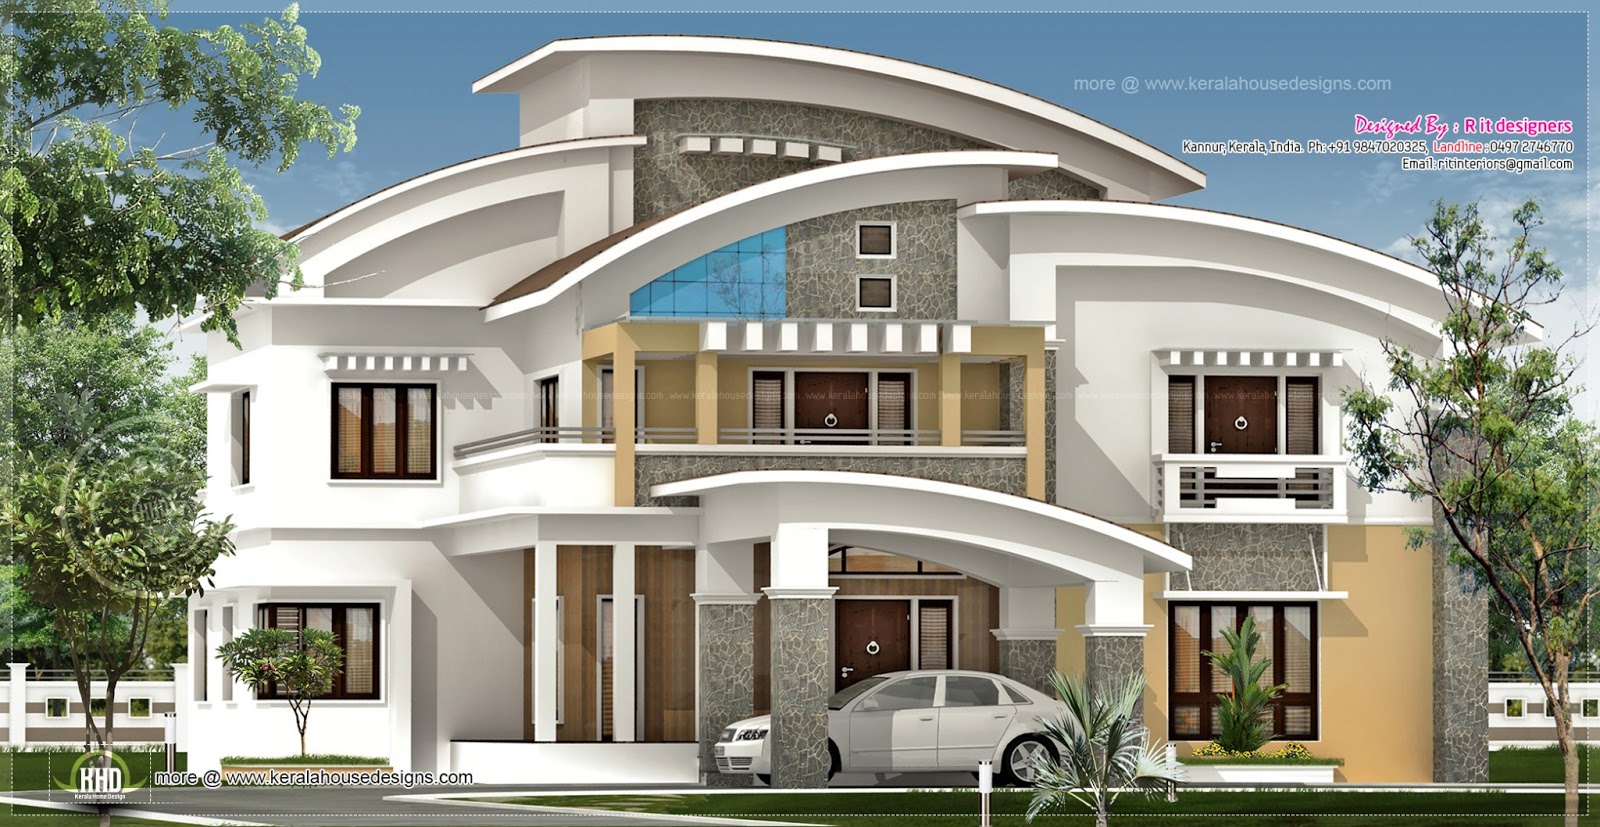 417 square yards designed by r it designers kannur kerala